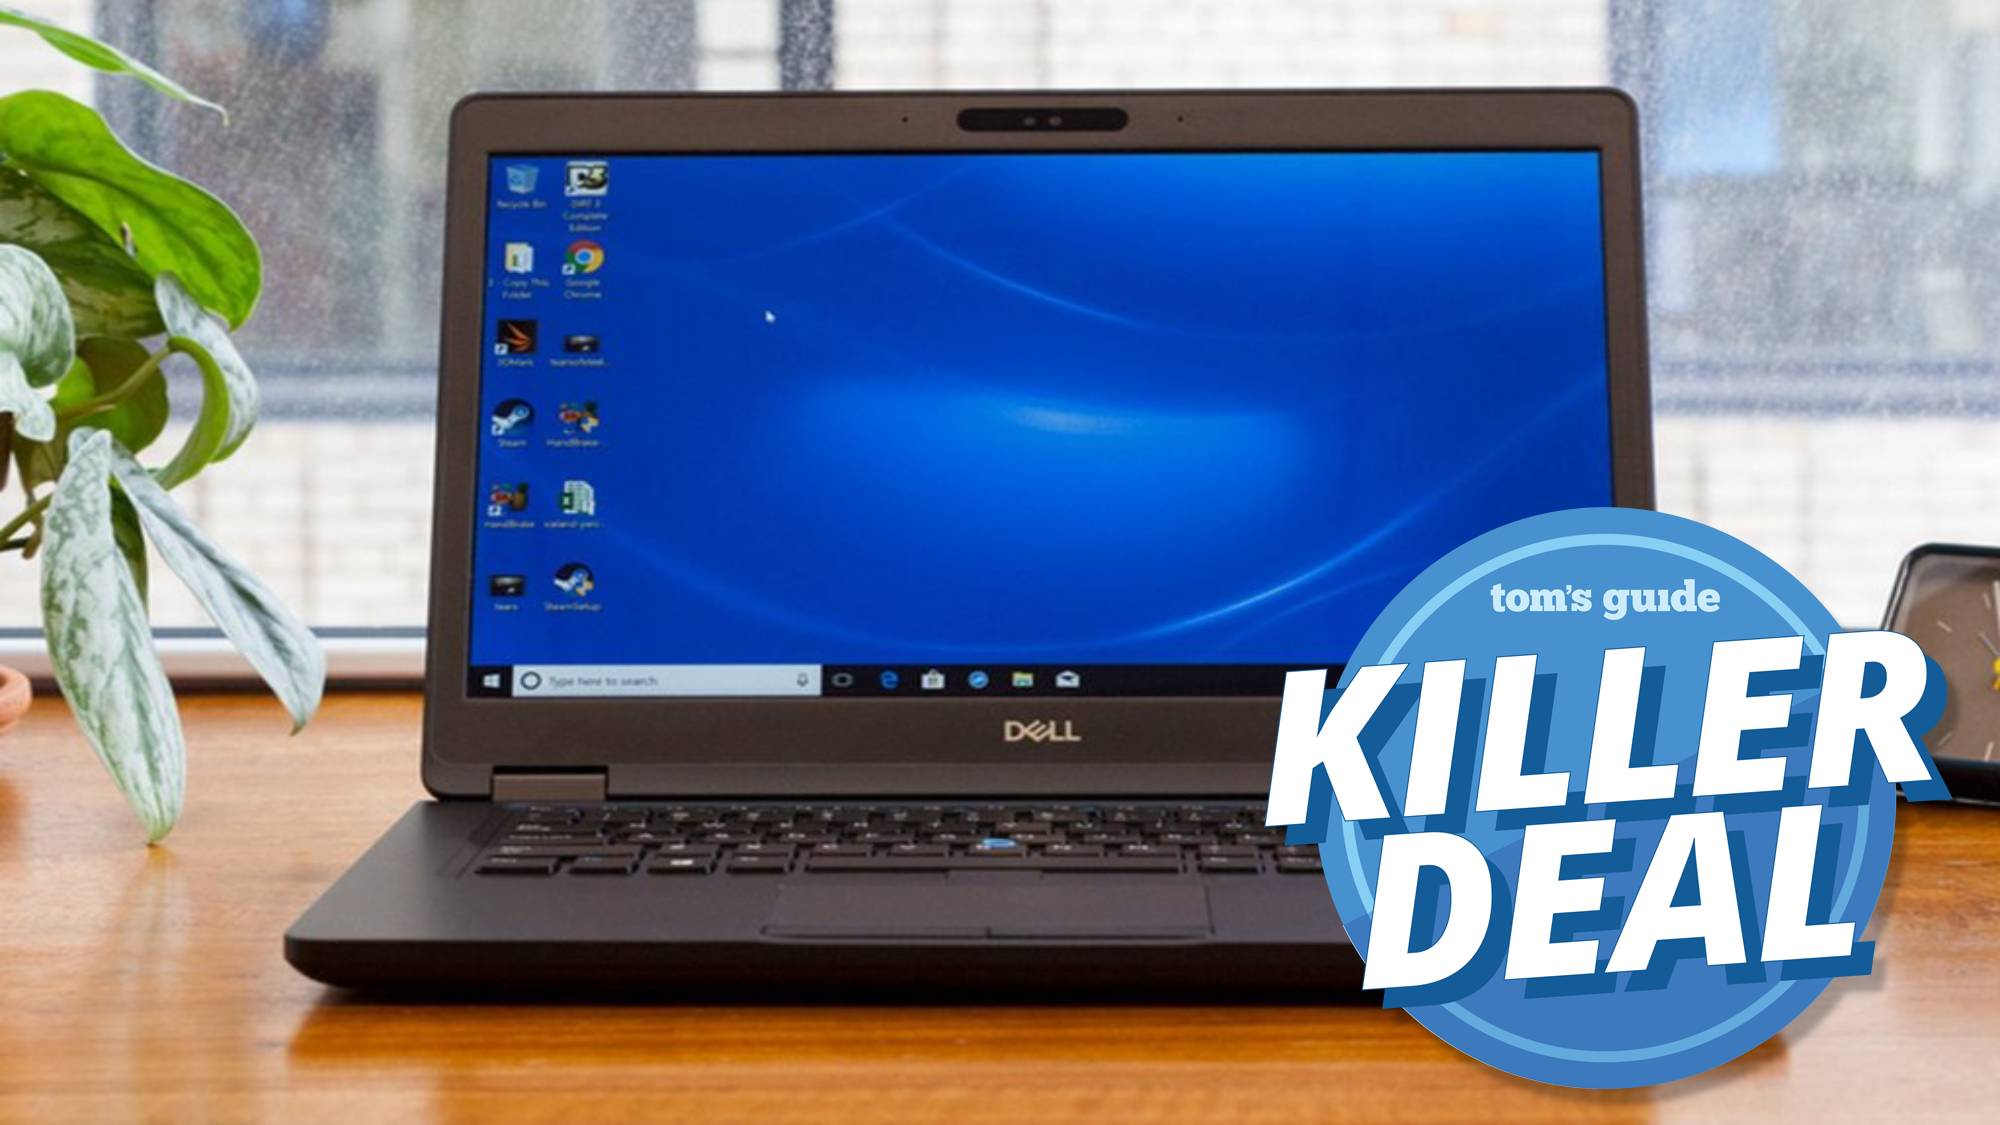 Get the speedy Dell Latitude business laptop for just $659 | Tom's Guide